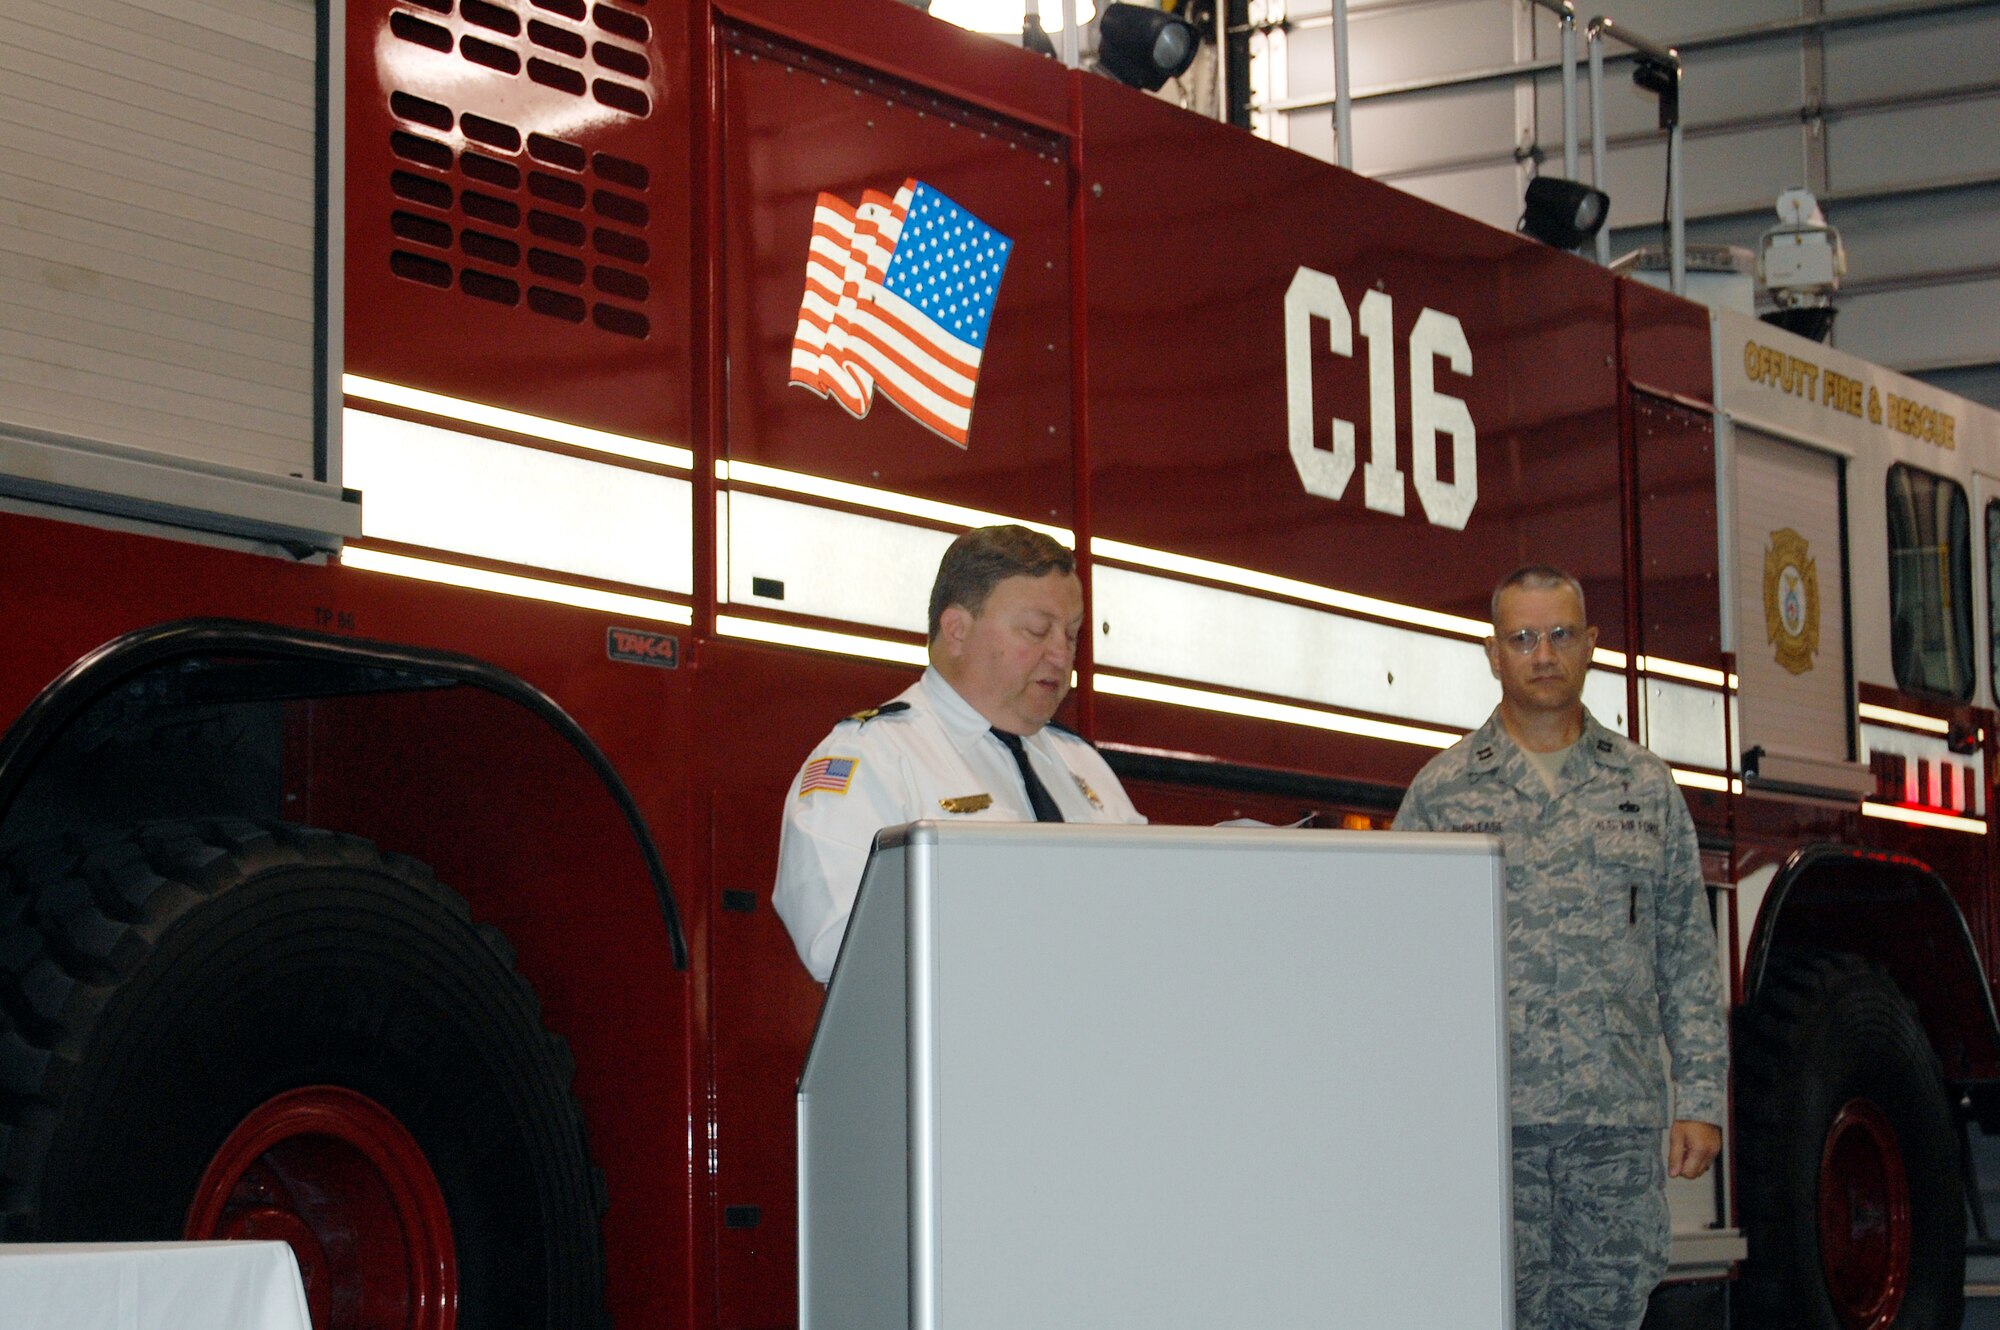 OFFUTT AIR FORCE BASE, Neb. - Fire Chief David Eblin explains the significance of  Offutt Fire Department's 9/11 Remembrance Ceremony Sept. 10 in the bay of the fire station. The annual ceremony, held during morning roll call, included the final alarm given to honor firefighters who have lost their lives in the line of duty. According to Station Chief Roger Filter, the tradition of the final alarm, consiting of two sets of five bell rings, dates back to the days of horse and buggy firefighters when alarm boxes were located around cities so people could notify fire departments of fires. They were also used  to notify citizens of the death of a firefighter.  U.S. Air Force photo by Debbie Aragon